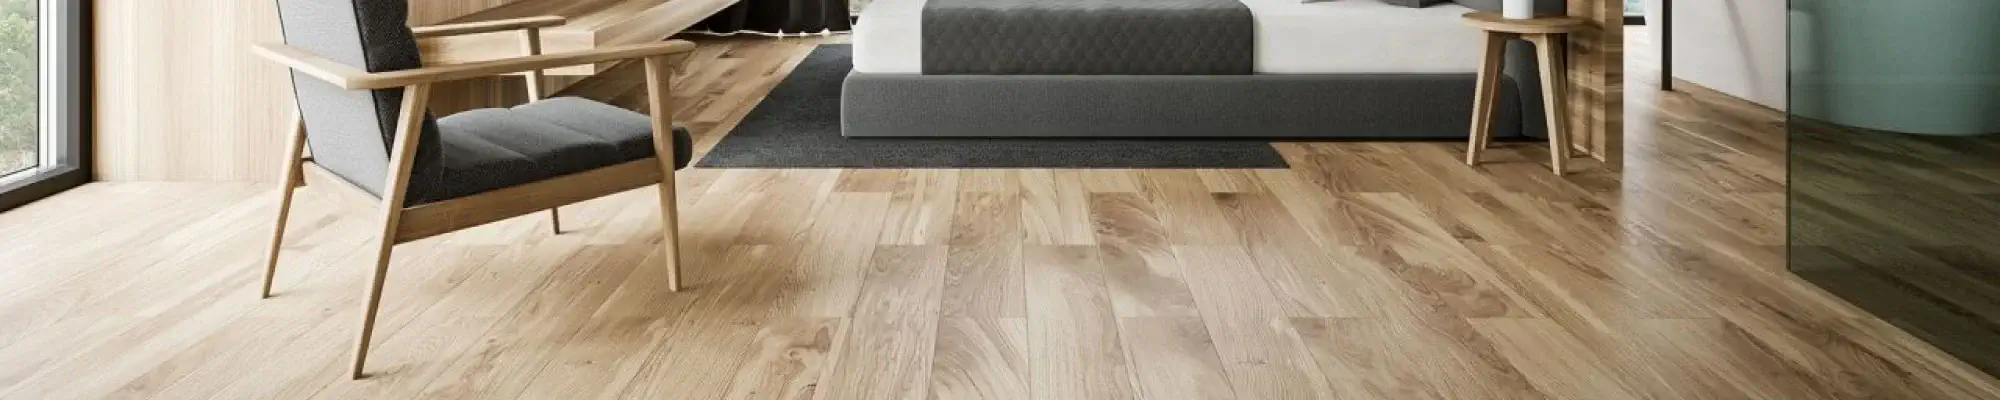 Choose from a wide variety of laminate styles from Reardon's Flooring